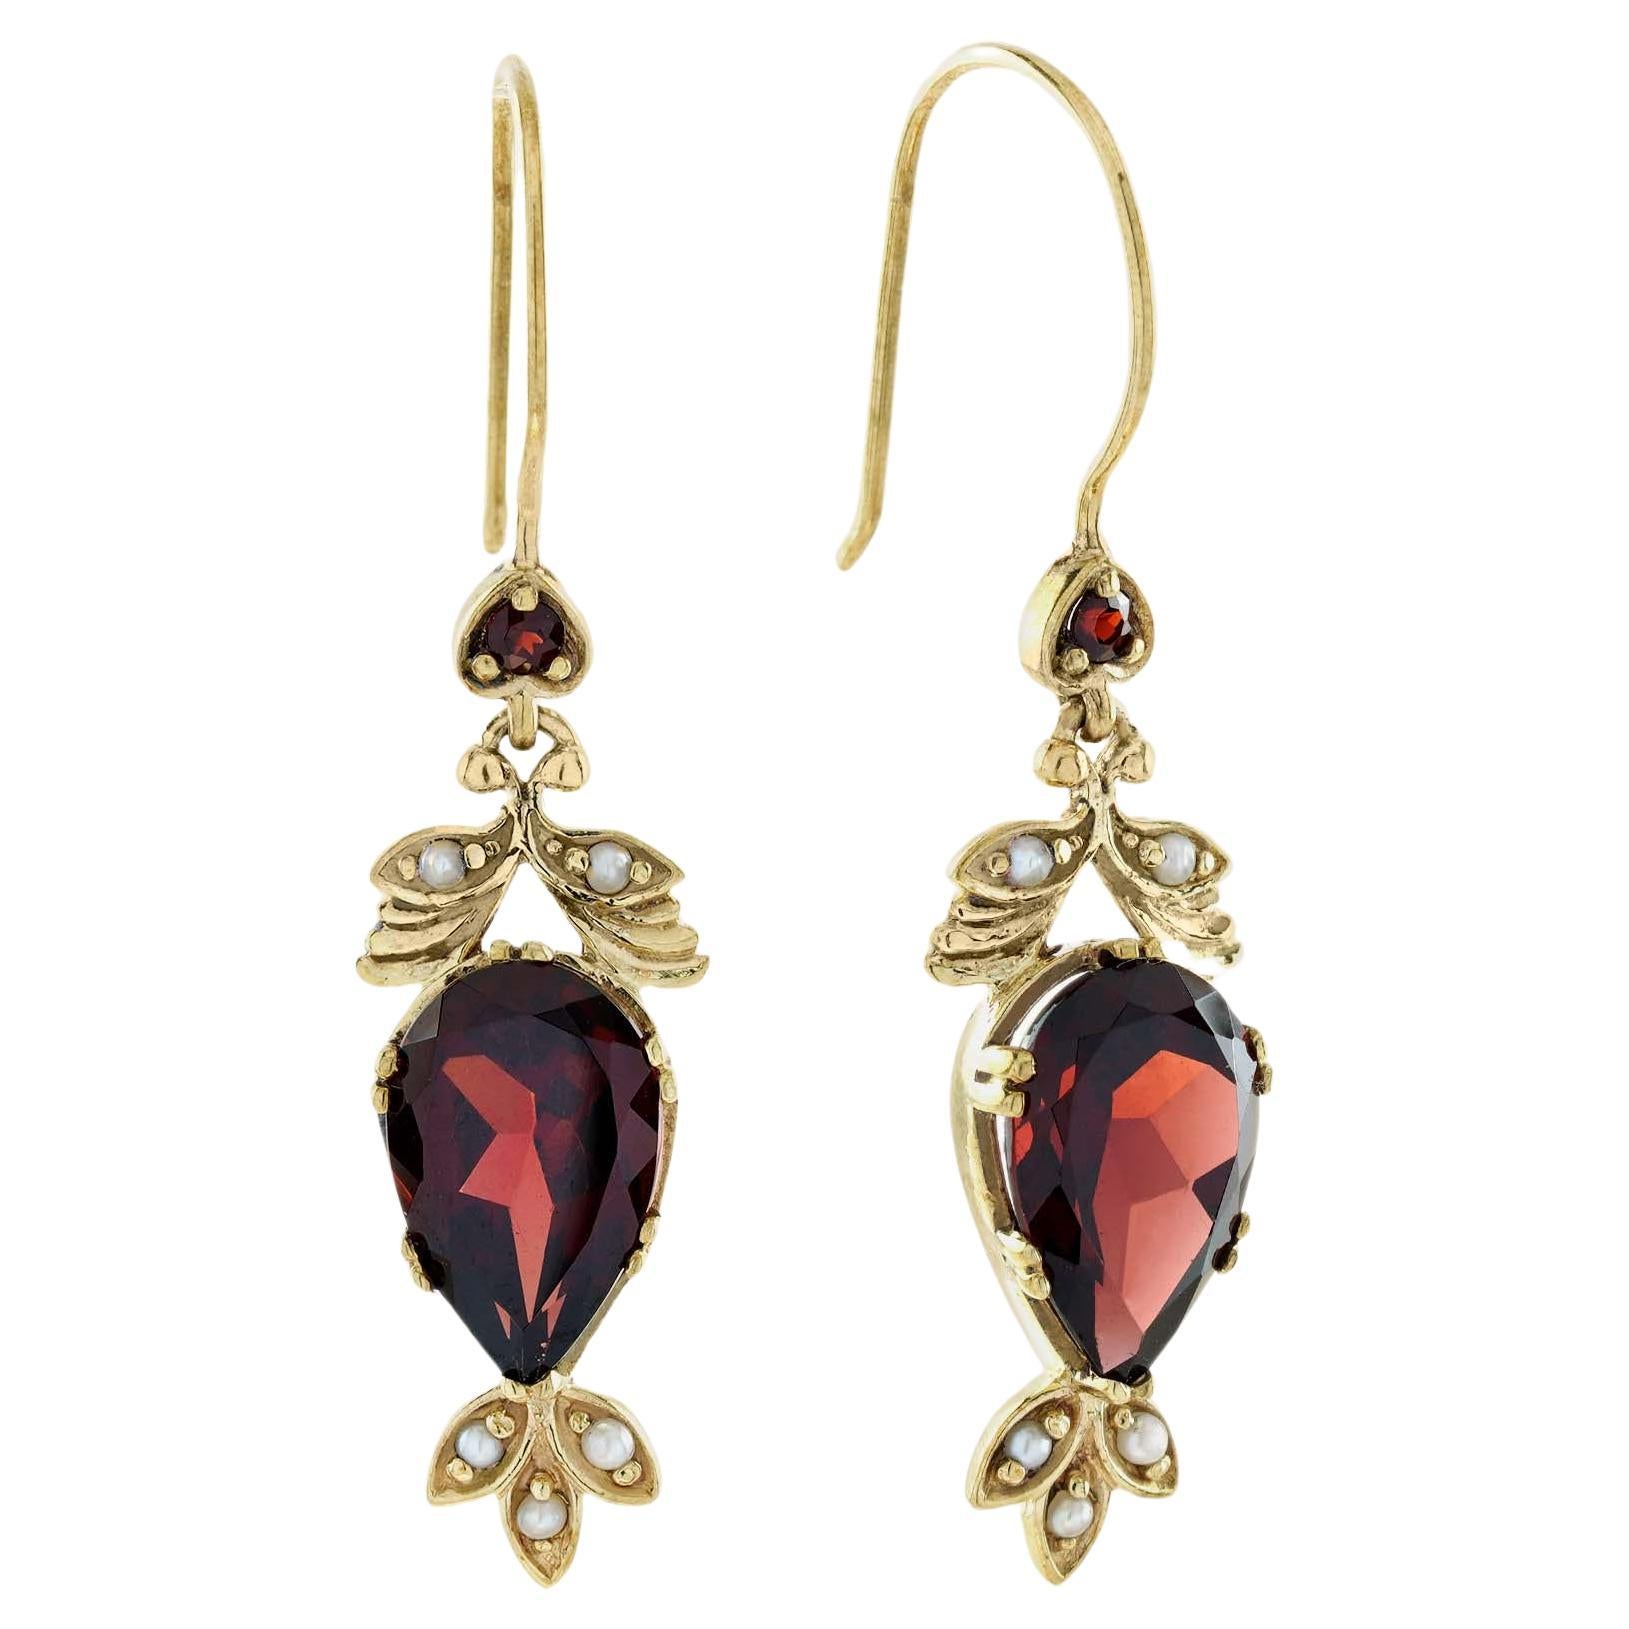 Natural Garnet and Pearl Vintage Style Floral Drop Earrings in Solid 9K Gold